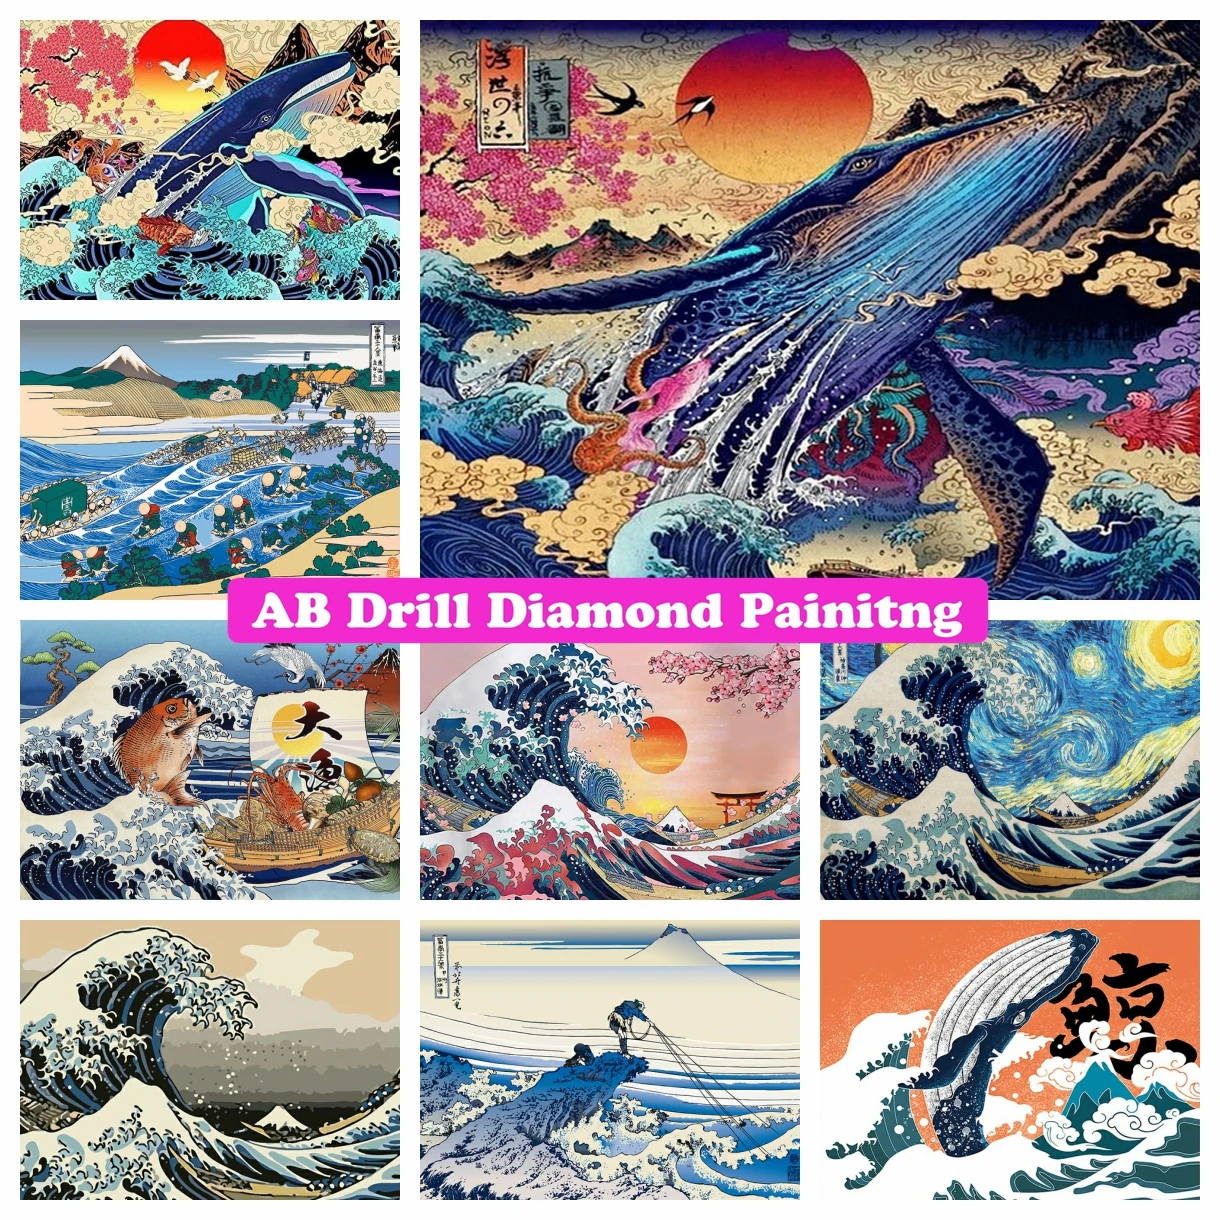 

Japan Ukiyo Scenery 5D DIY AB Drills Diamond Painting Ocean Great Wave Whale Embroidery Cross Stitch Mosaic Pictures Home Decor